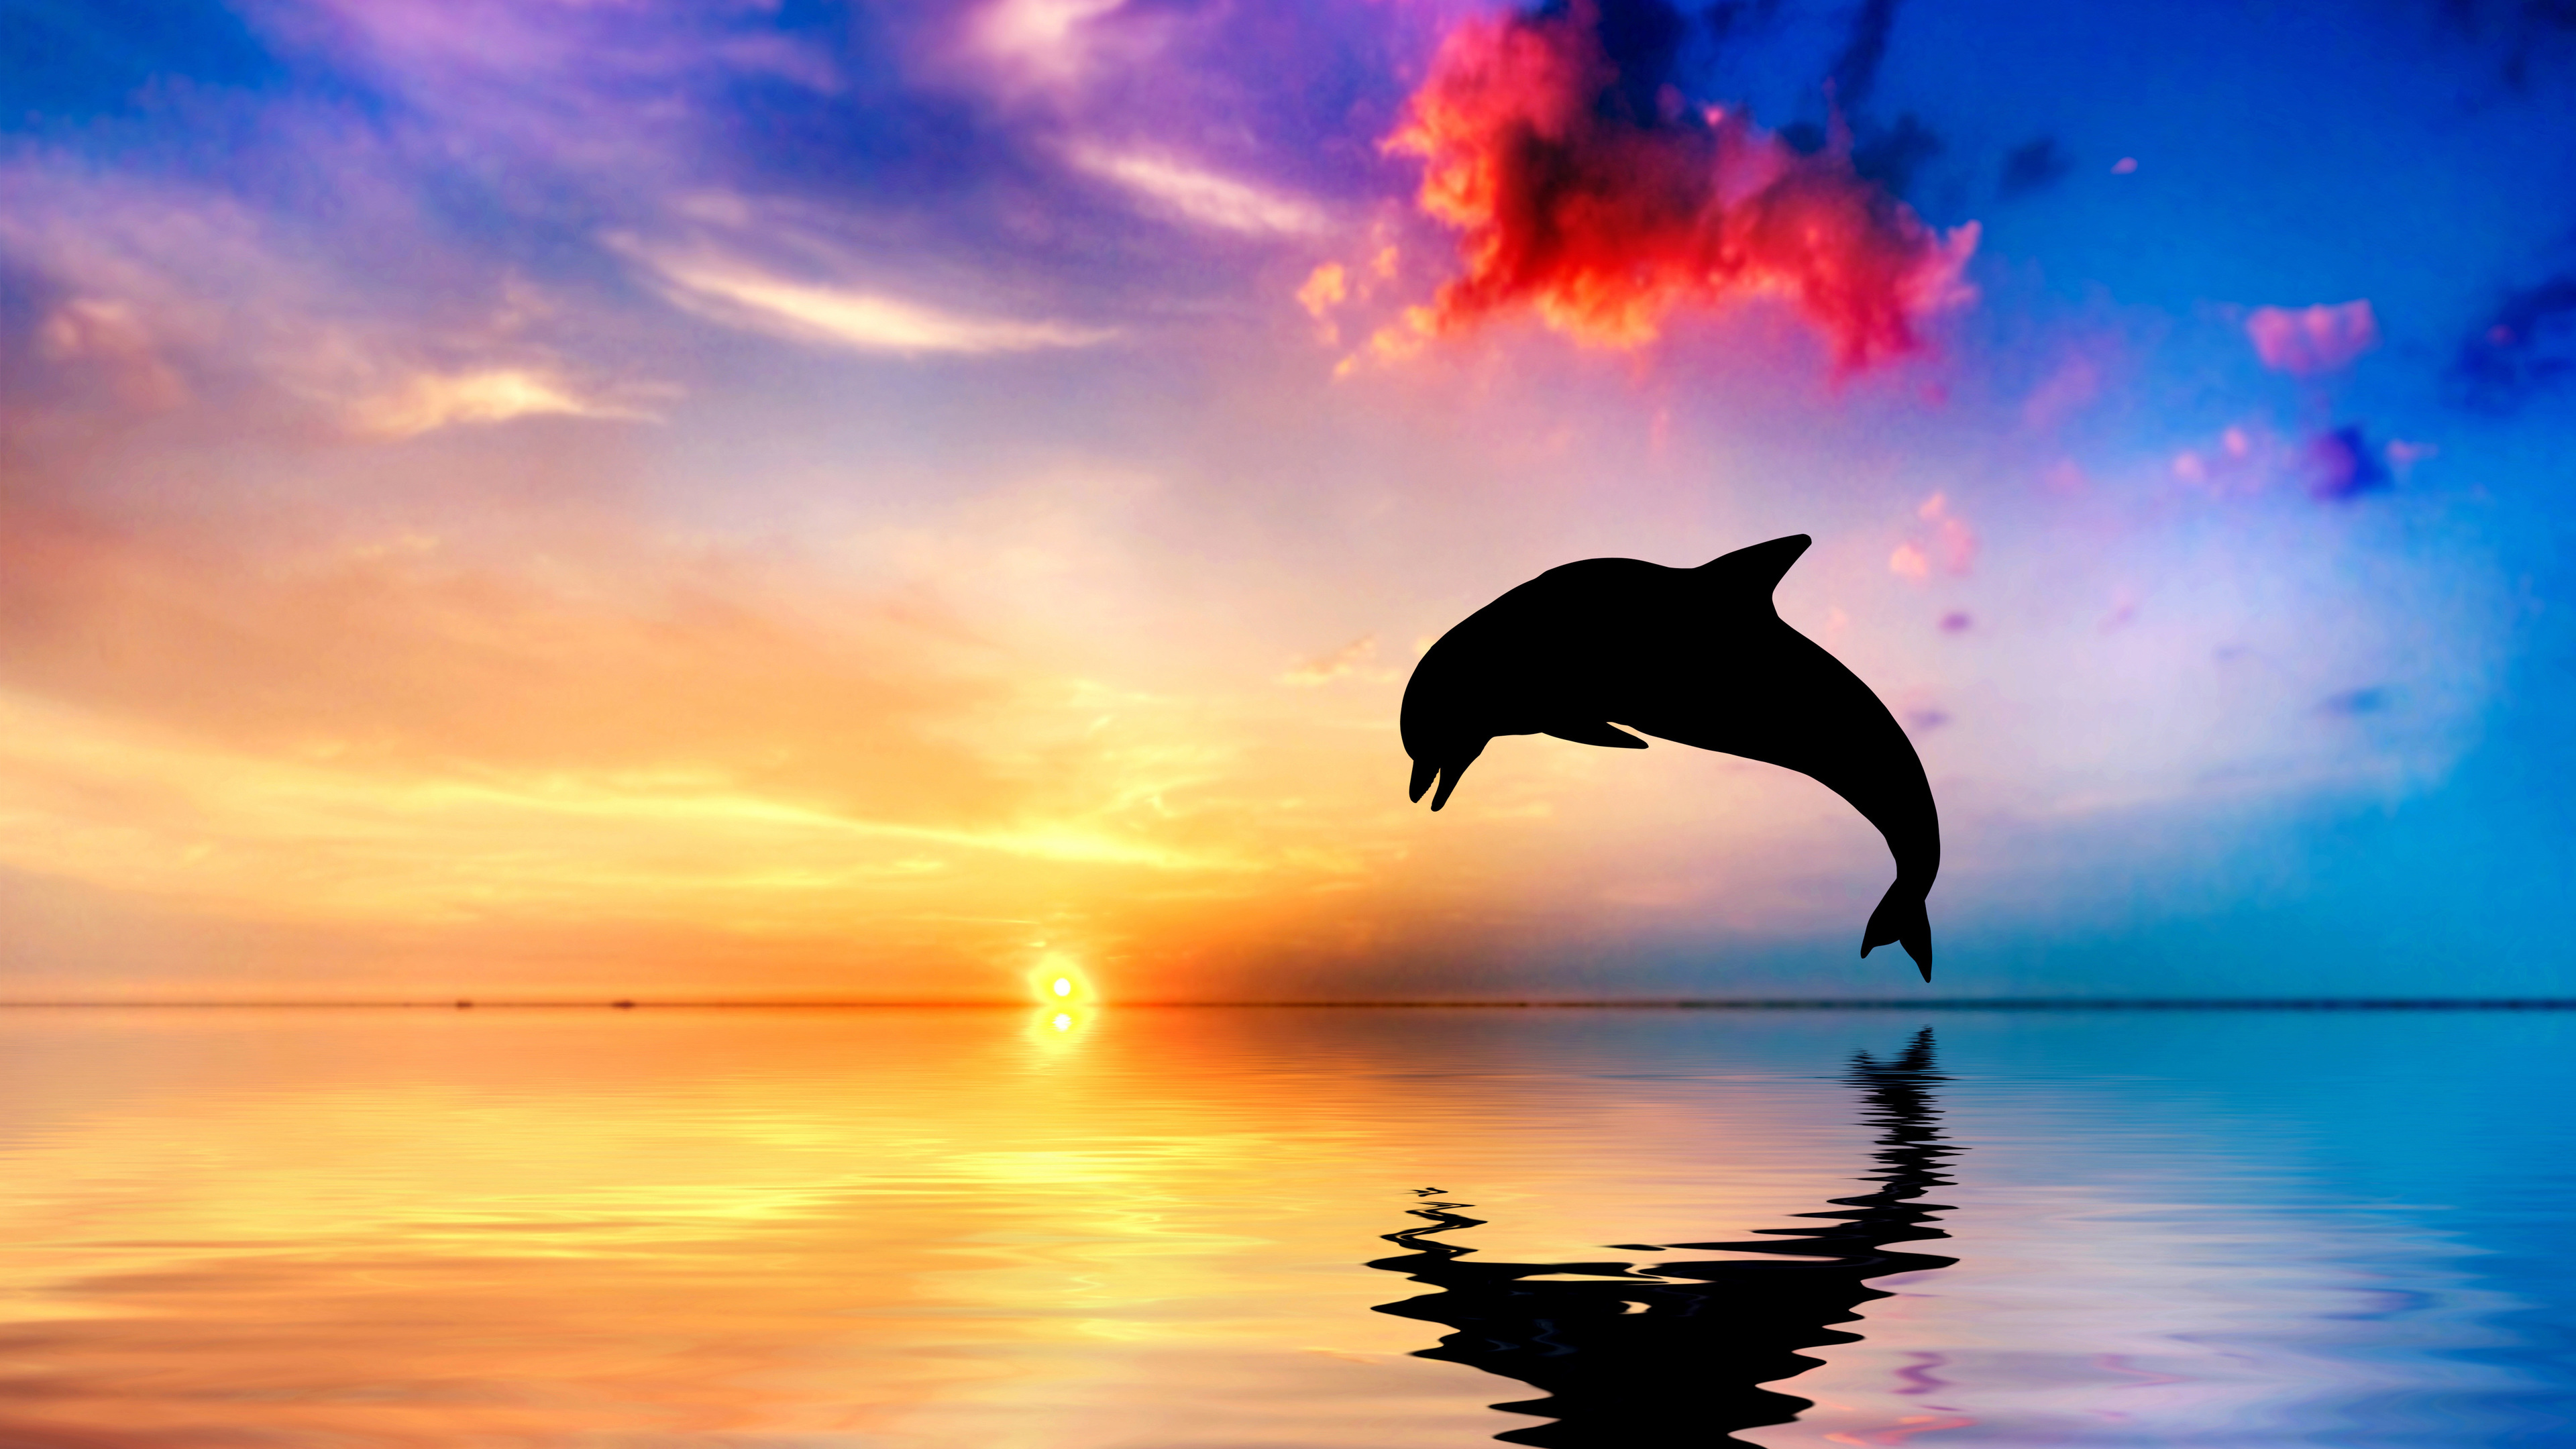 Download Dolphin Jumping Out Of Water Sunset View 4k - Beautiful Ocean